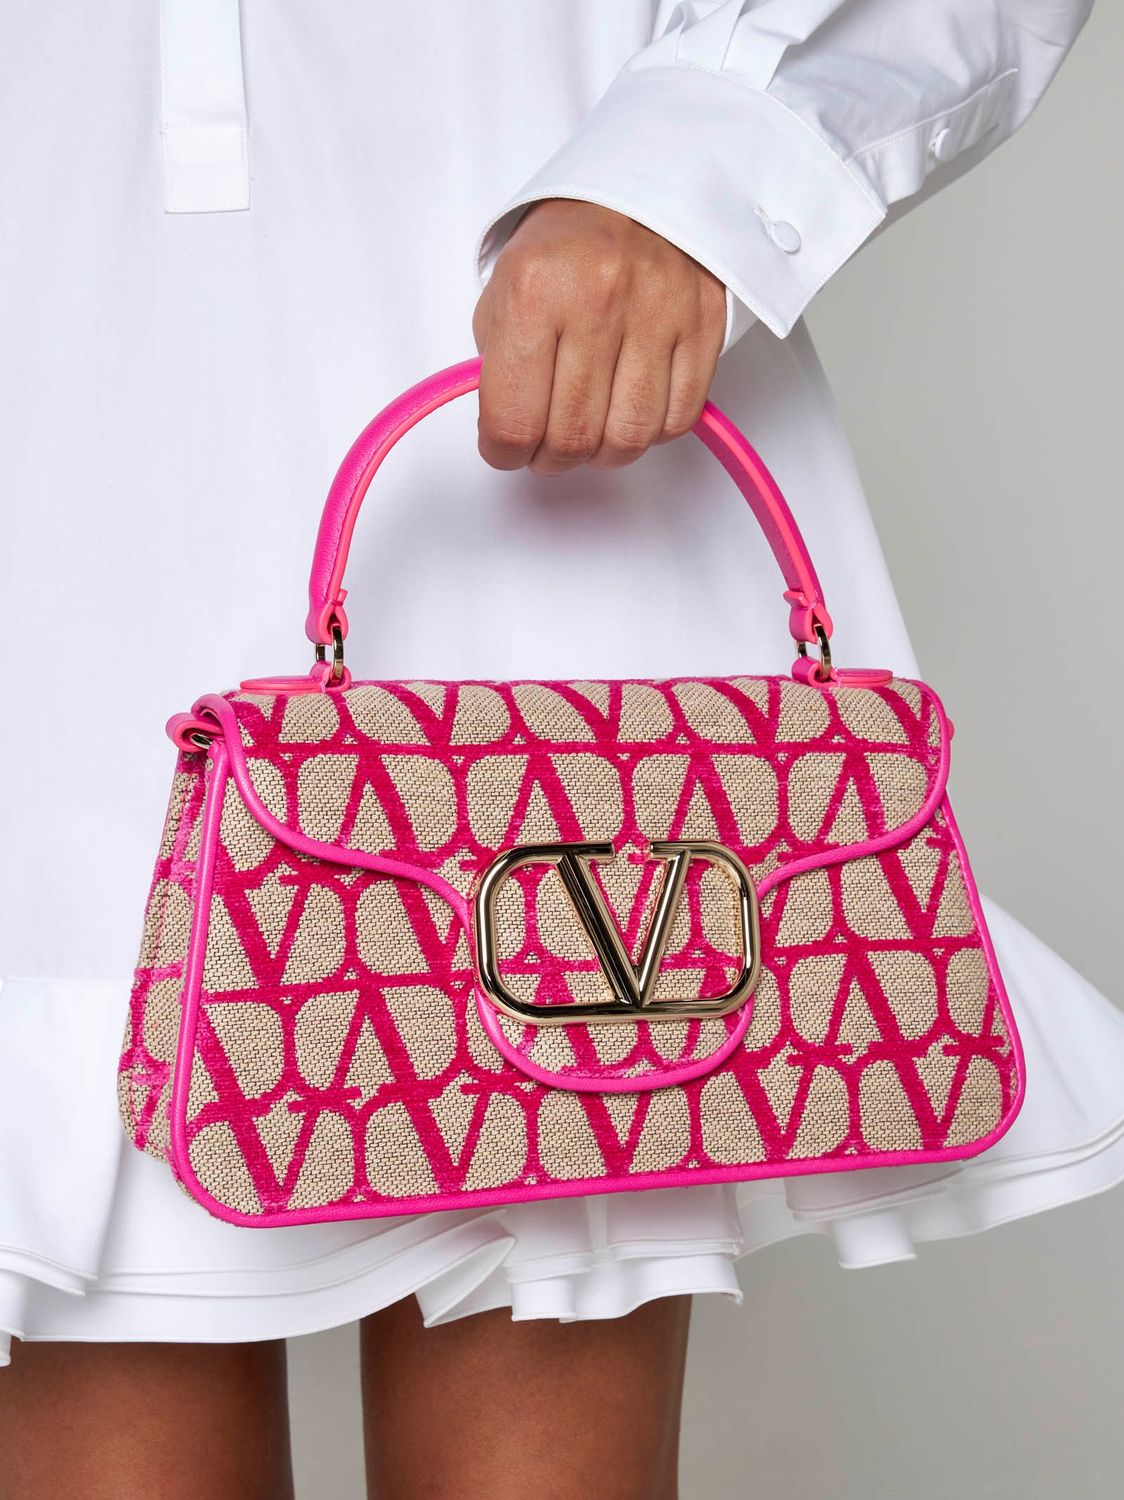 VALENTINO Luxurious Pink Top-Handle Handbag for Women - FW23 Collection